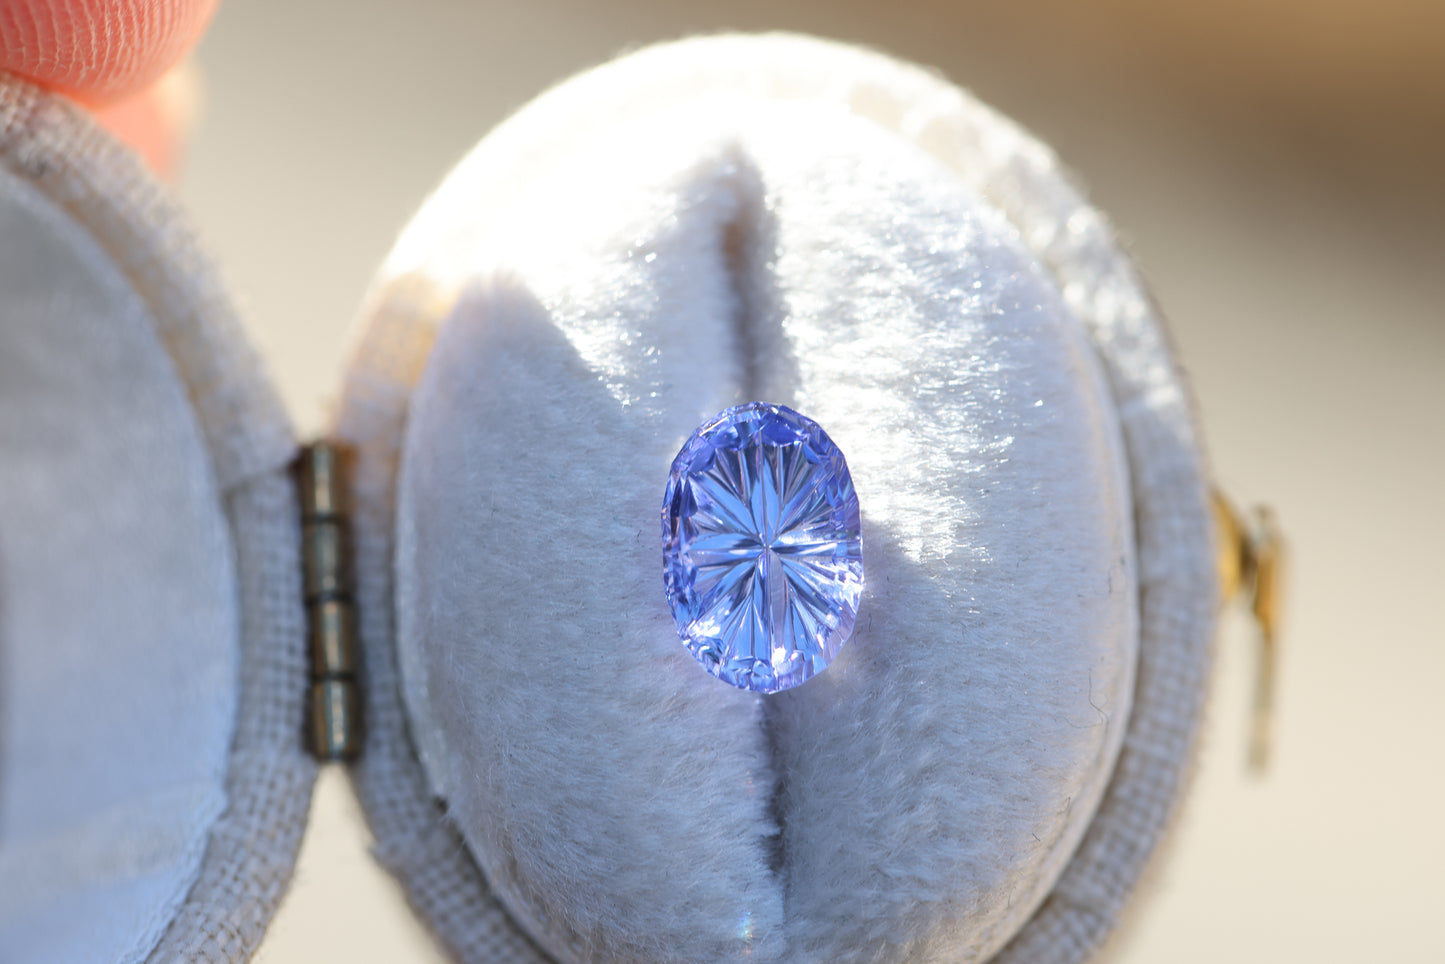 Load image into Gallery viewer, 1.51ct oval tanzanite - Starbrite cut by John Dyer
